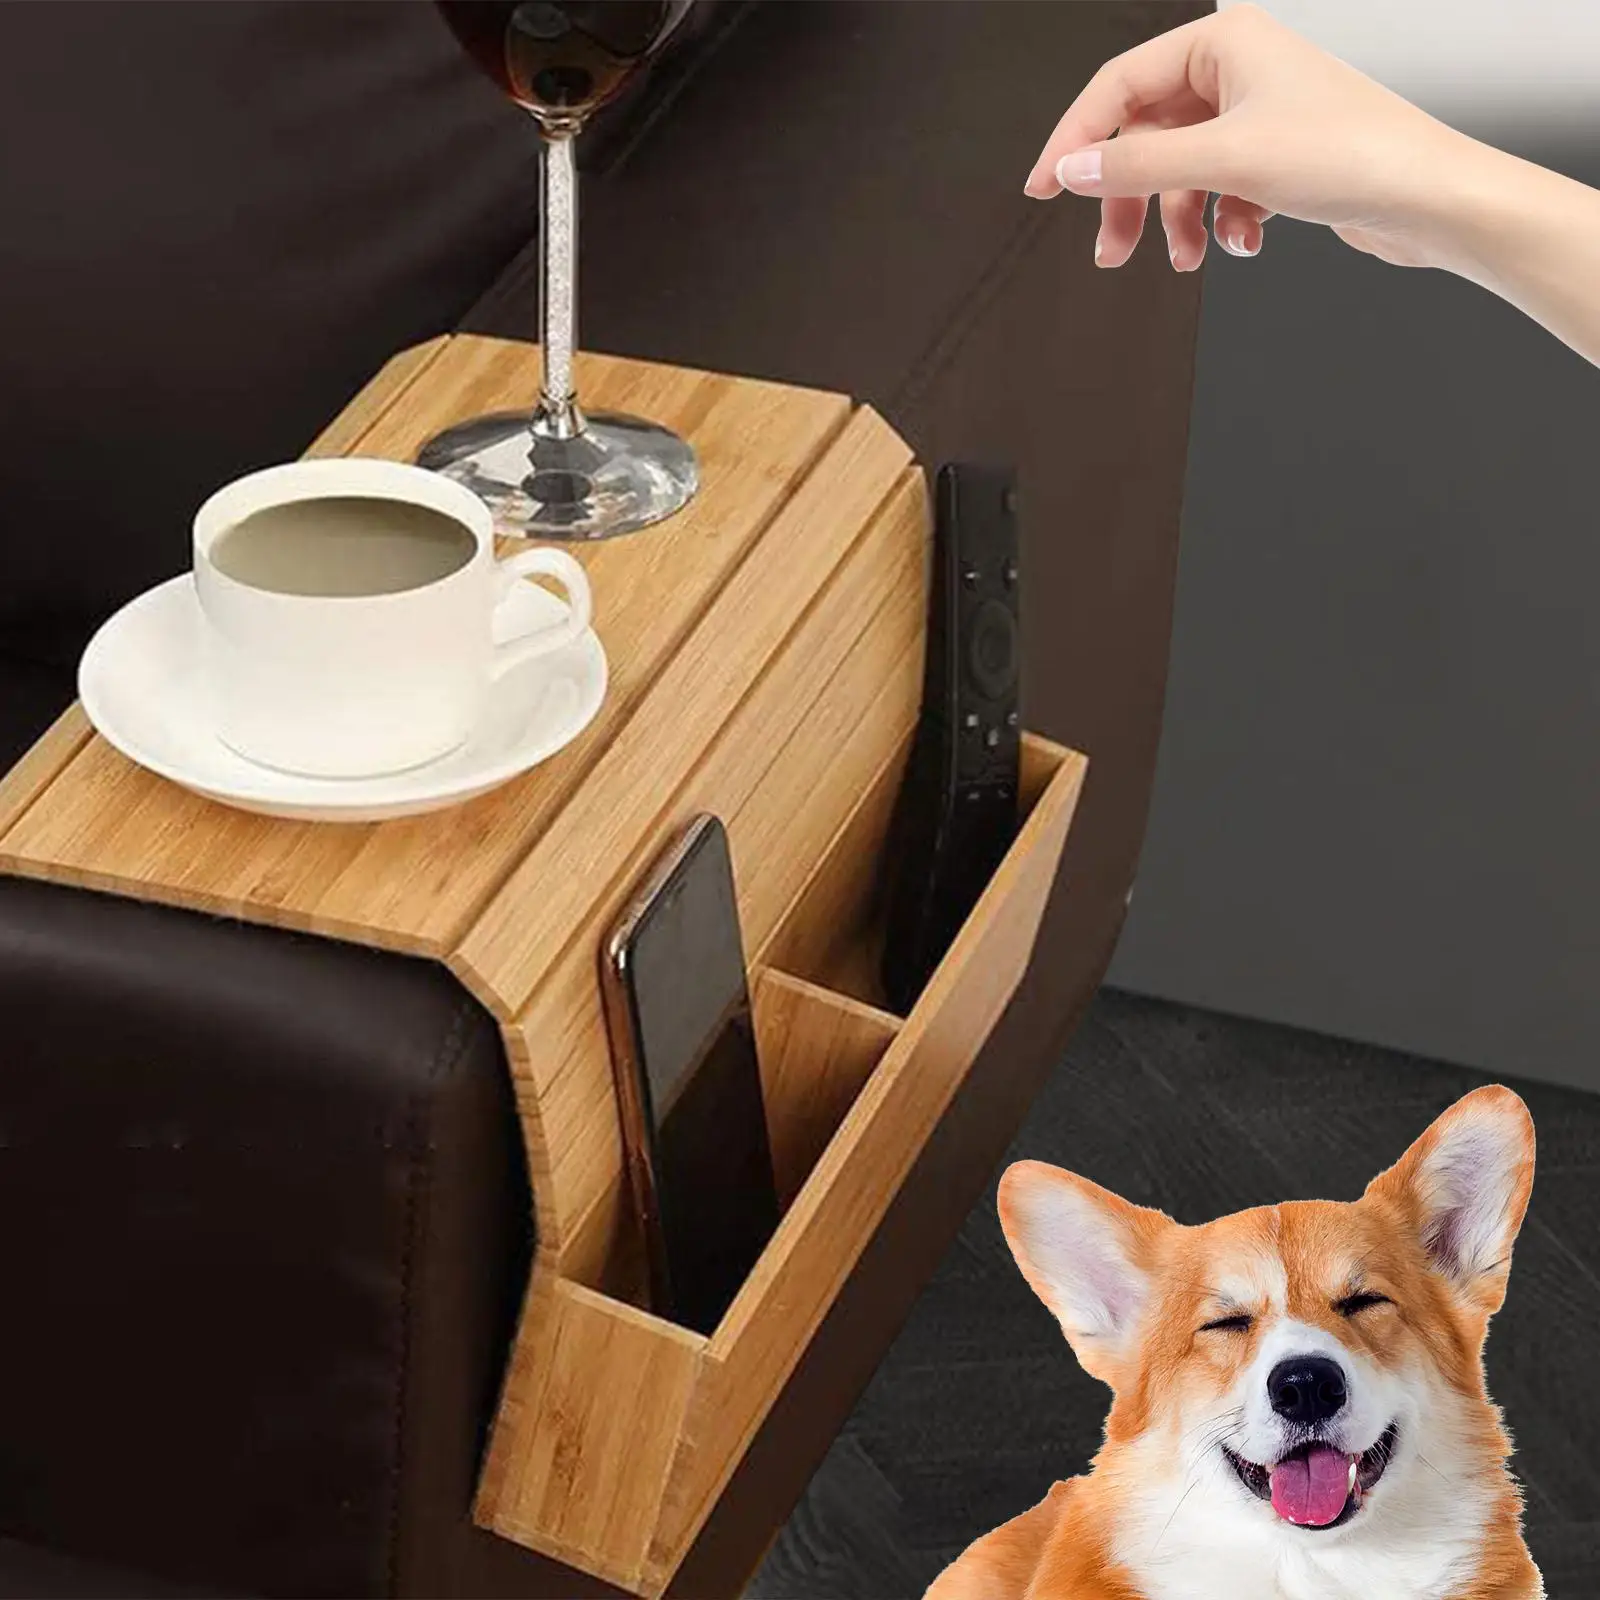 Couch Cup Holder Wood Armchair Pen Books Multifunctional Drinks Remote Control Couch Chair Caddys Snacks Sofa Armrest Organizer